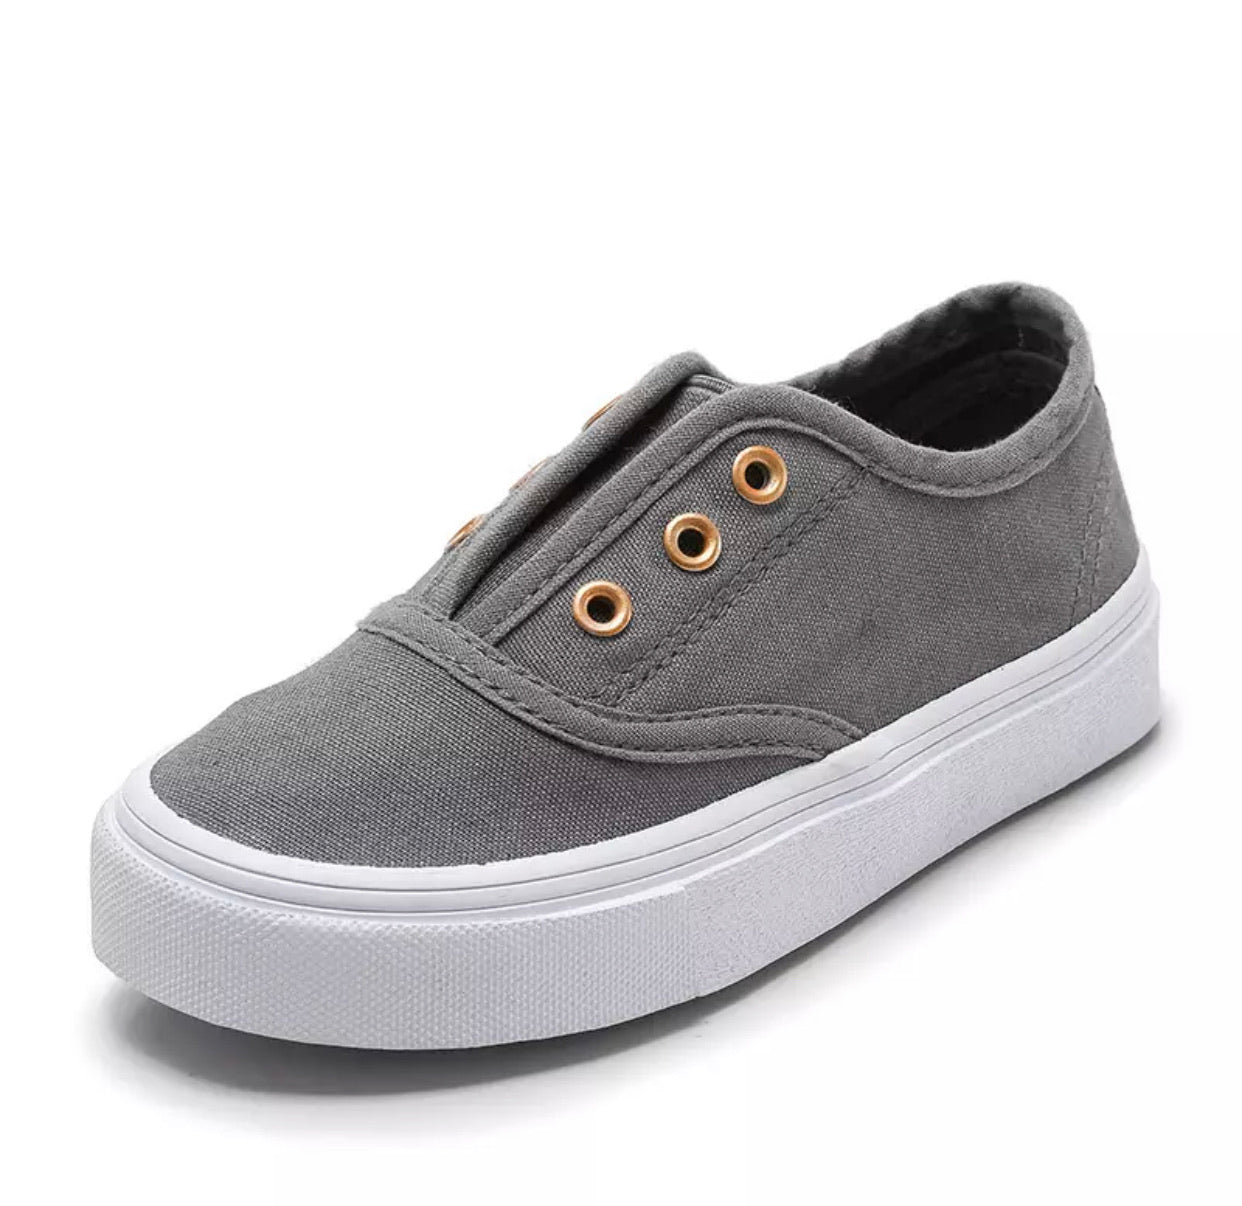 Candy Coloured Canvas Sneakers in GRAY